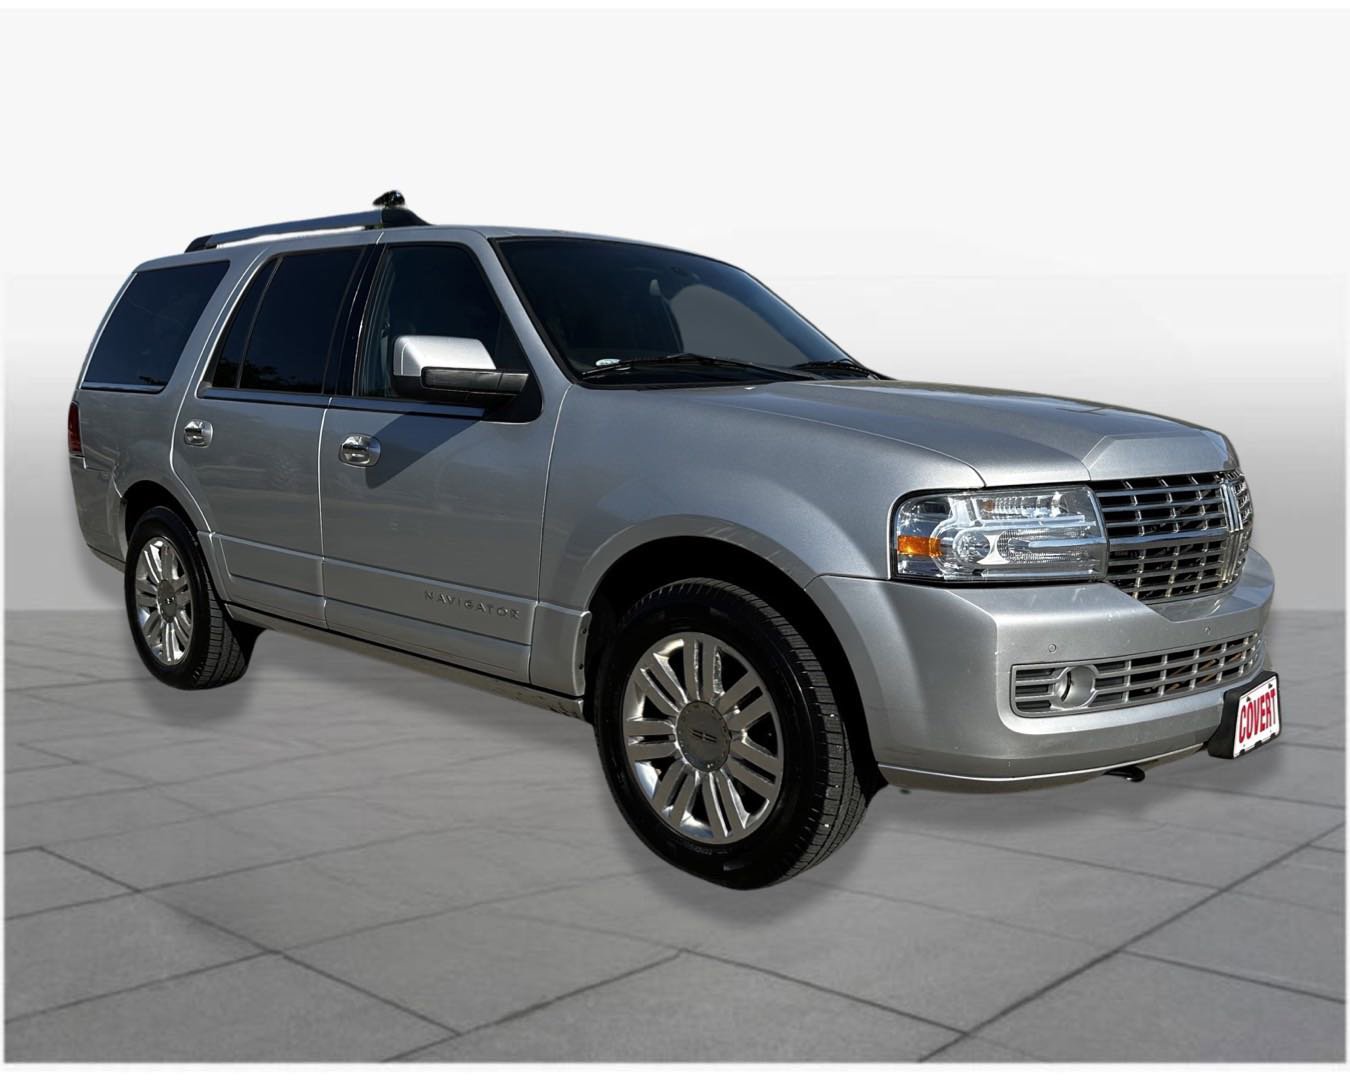 Pre-Owned 2012 Lincoln Navigator Sport Utility in Austin #4230091A | Covert  Cadillac